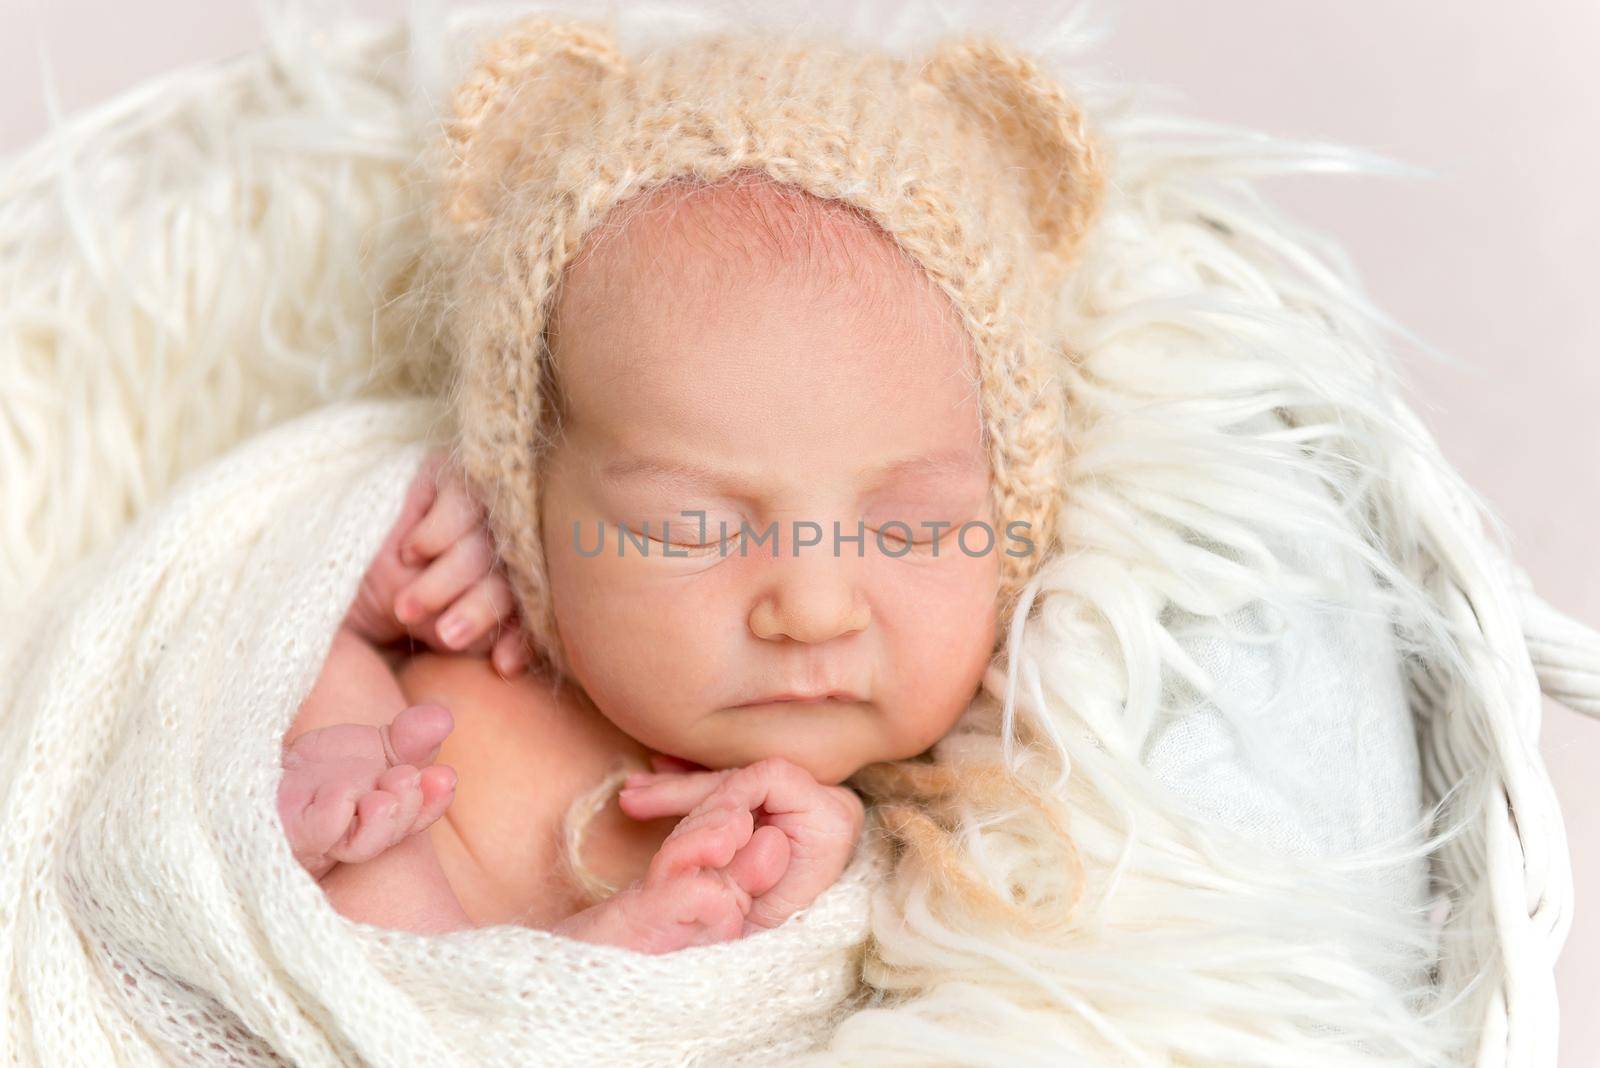 Adorable newborn baby napping in white round basket, top view. Little newborn baby in funny bonnet with ears